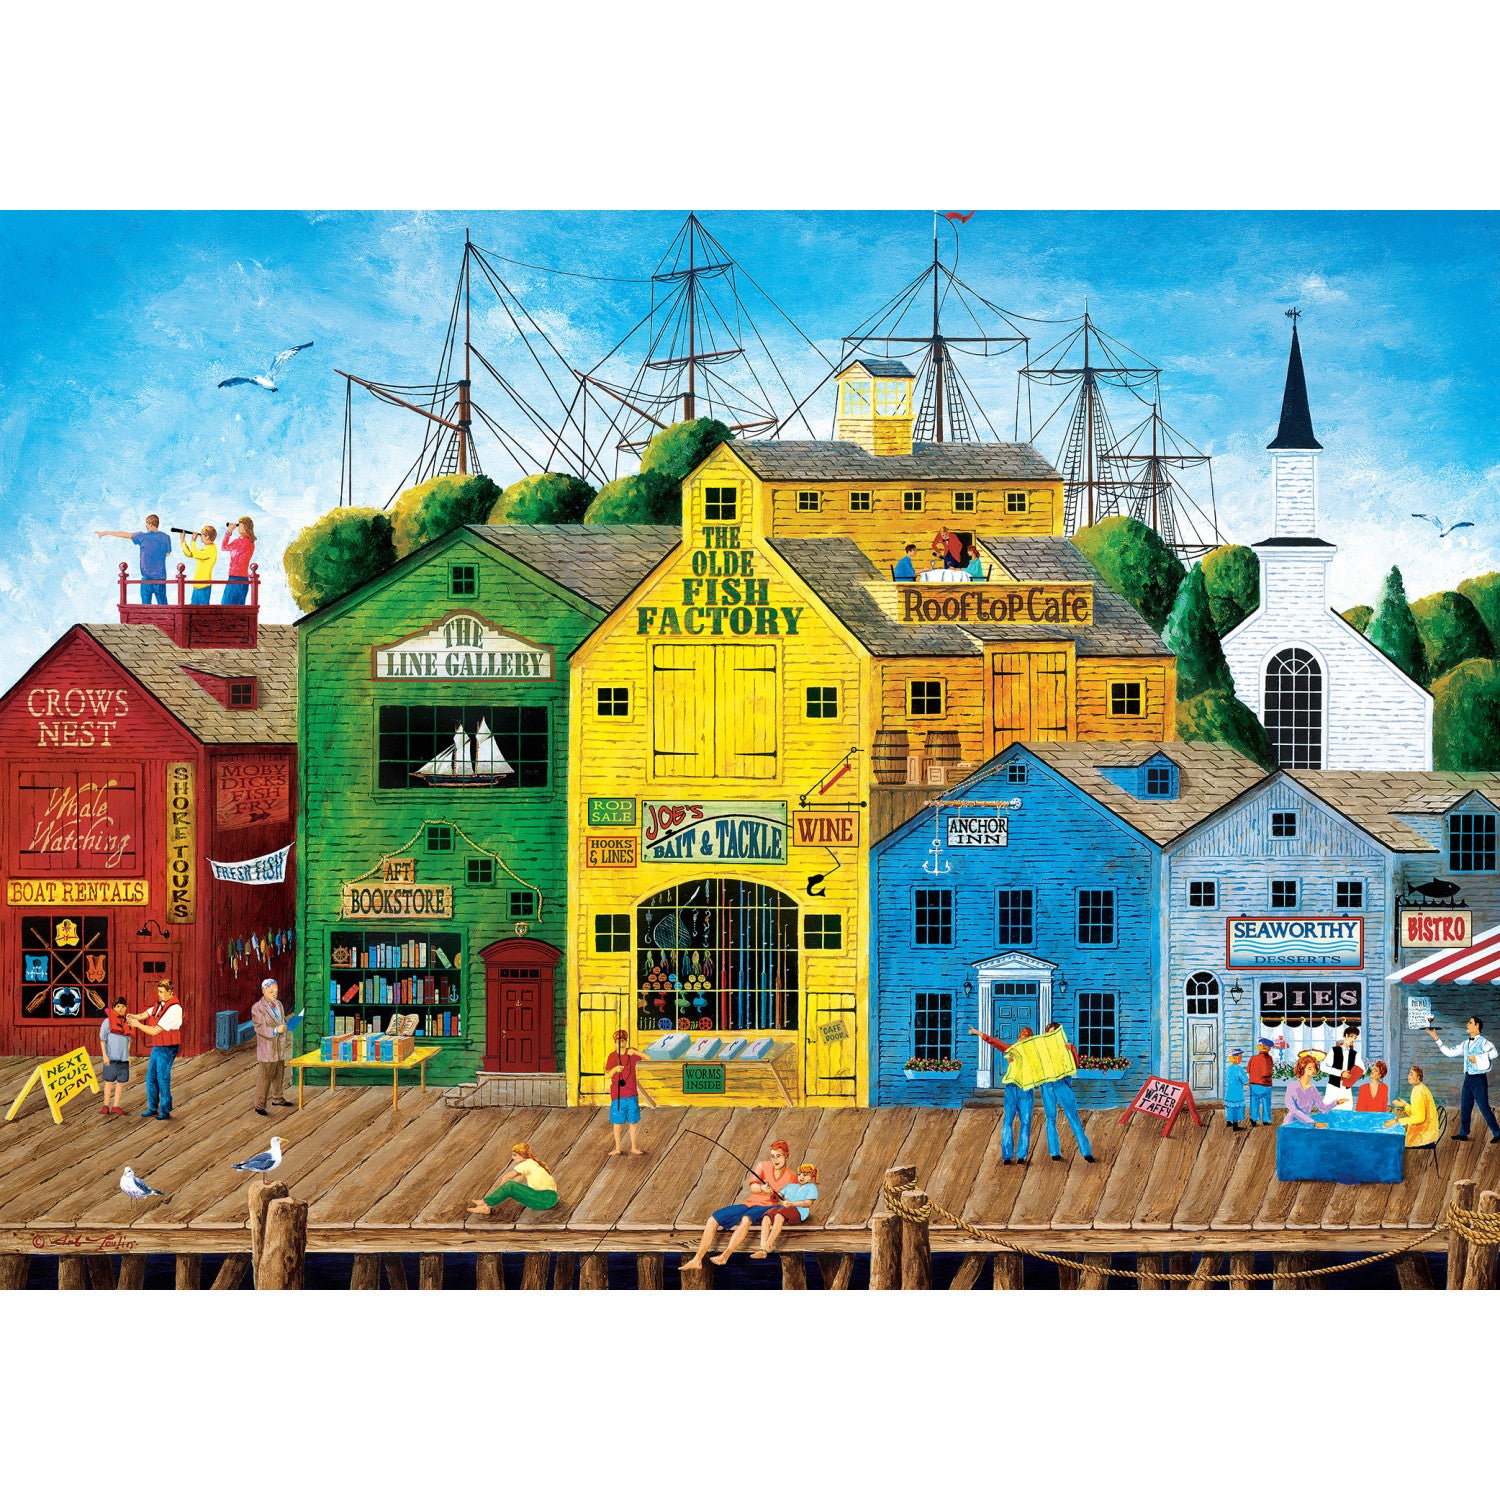 Masterpieces Hometown Gallery Crows Nest Harbor - 1000 Piece Jigsaw Puzzle